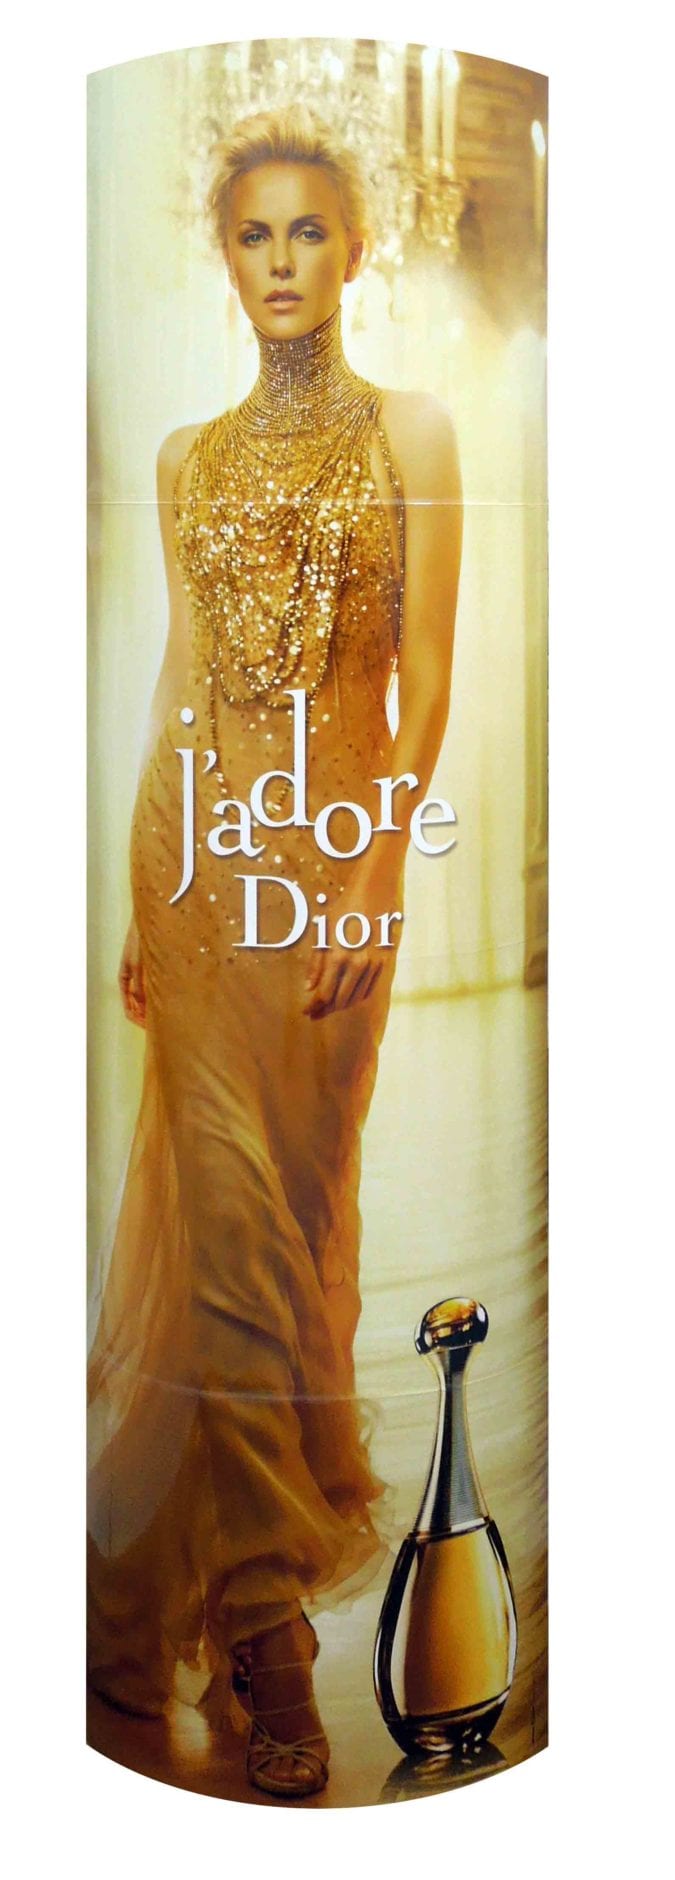 Elips_Dior This is not just another cardboard, retail sign. This patented system is quick and easy to assemble. It’s foldable and economical to ship. Our high quality graphic print capabilities and graphic design team allow us to fully customize each display for your specific needs. We offer multiple sizes and all of our corrugated displays and signs are made from sustainable and recyclable materials. The Flash Totem is a great value for little cost. We offer the best in-store, point of purchase signs and displays on the market today. We can help you come up with a design that will make an impact in retail stores everywhere and maximize your ROI. Contact us today to get your free quote at https://www.landaal.com